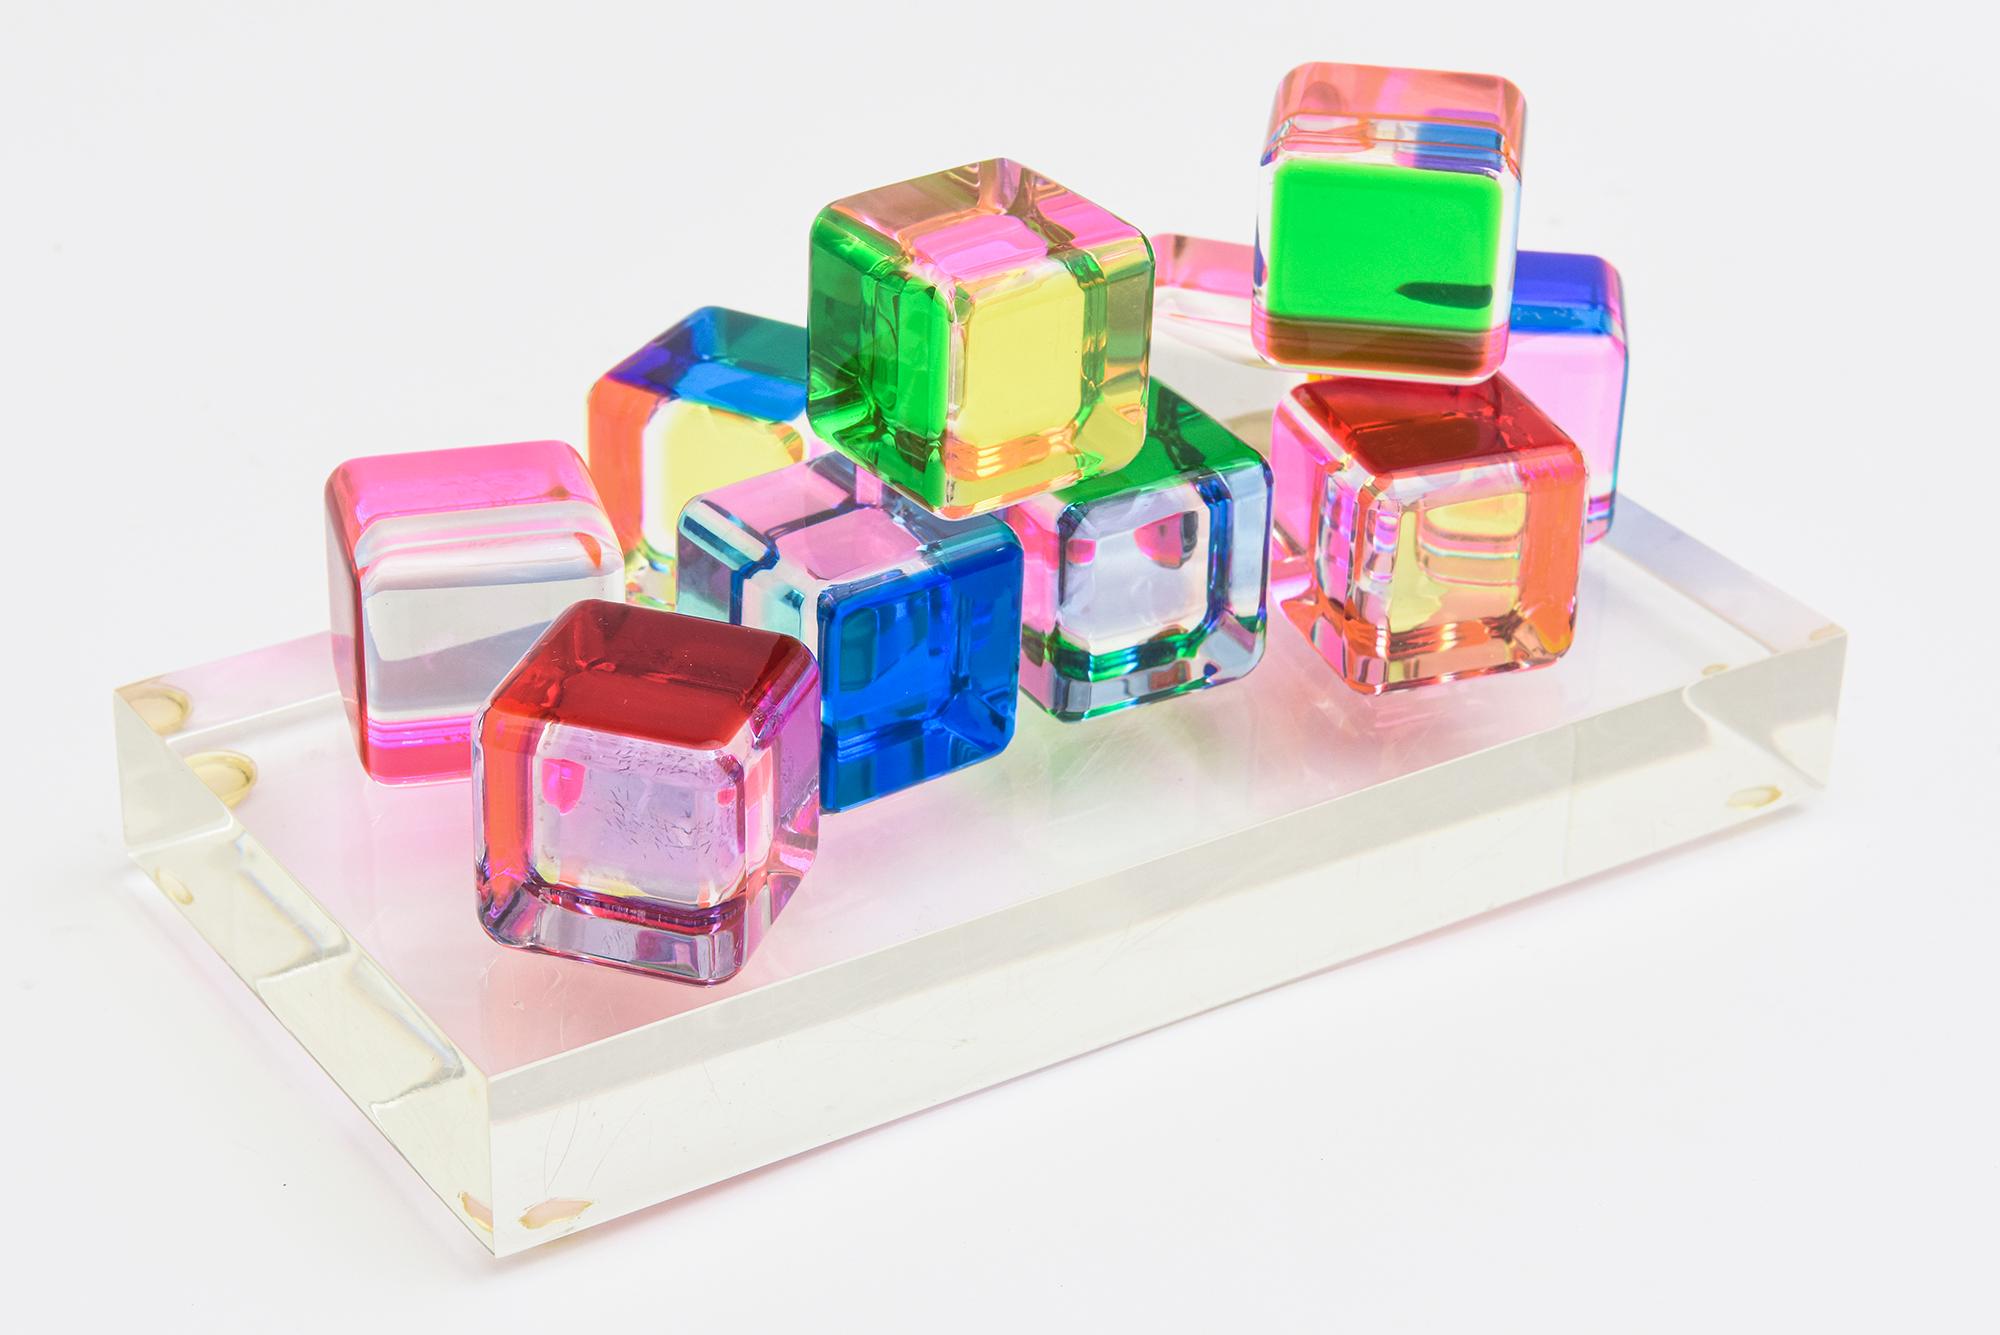 Vasa Mihich Laminated Lucite Cube Sculptures Signed Set of 10 on Lucite Base 1